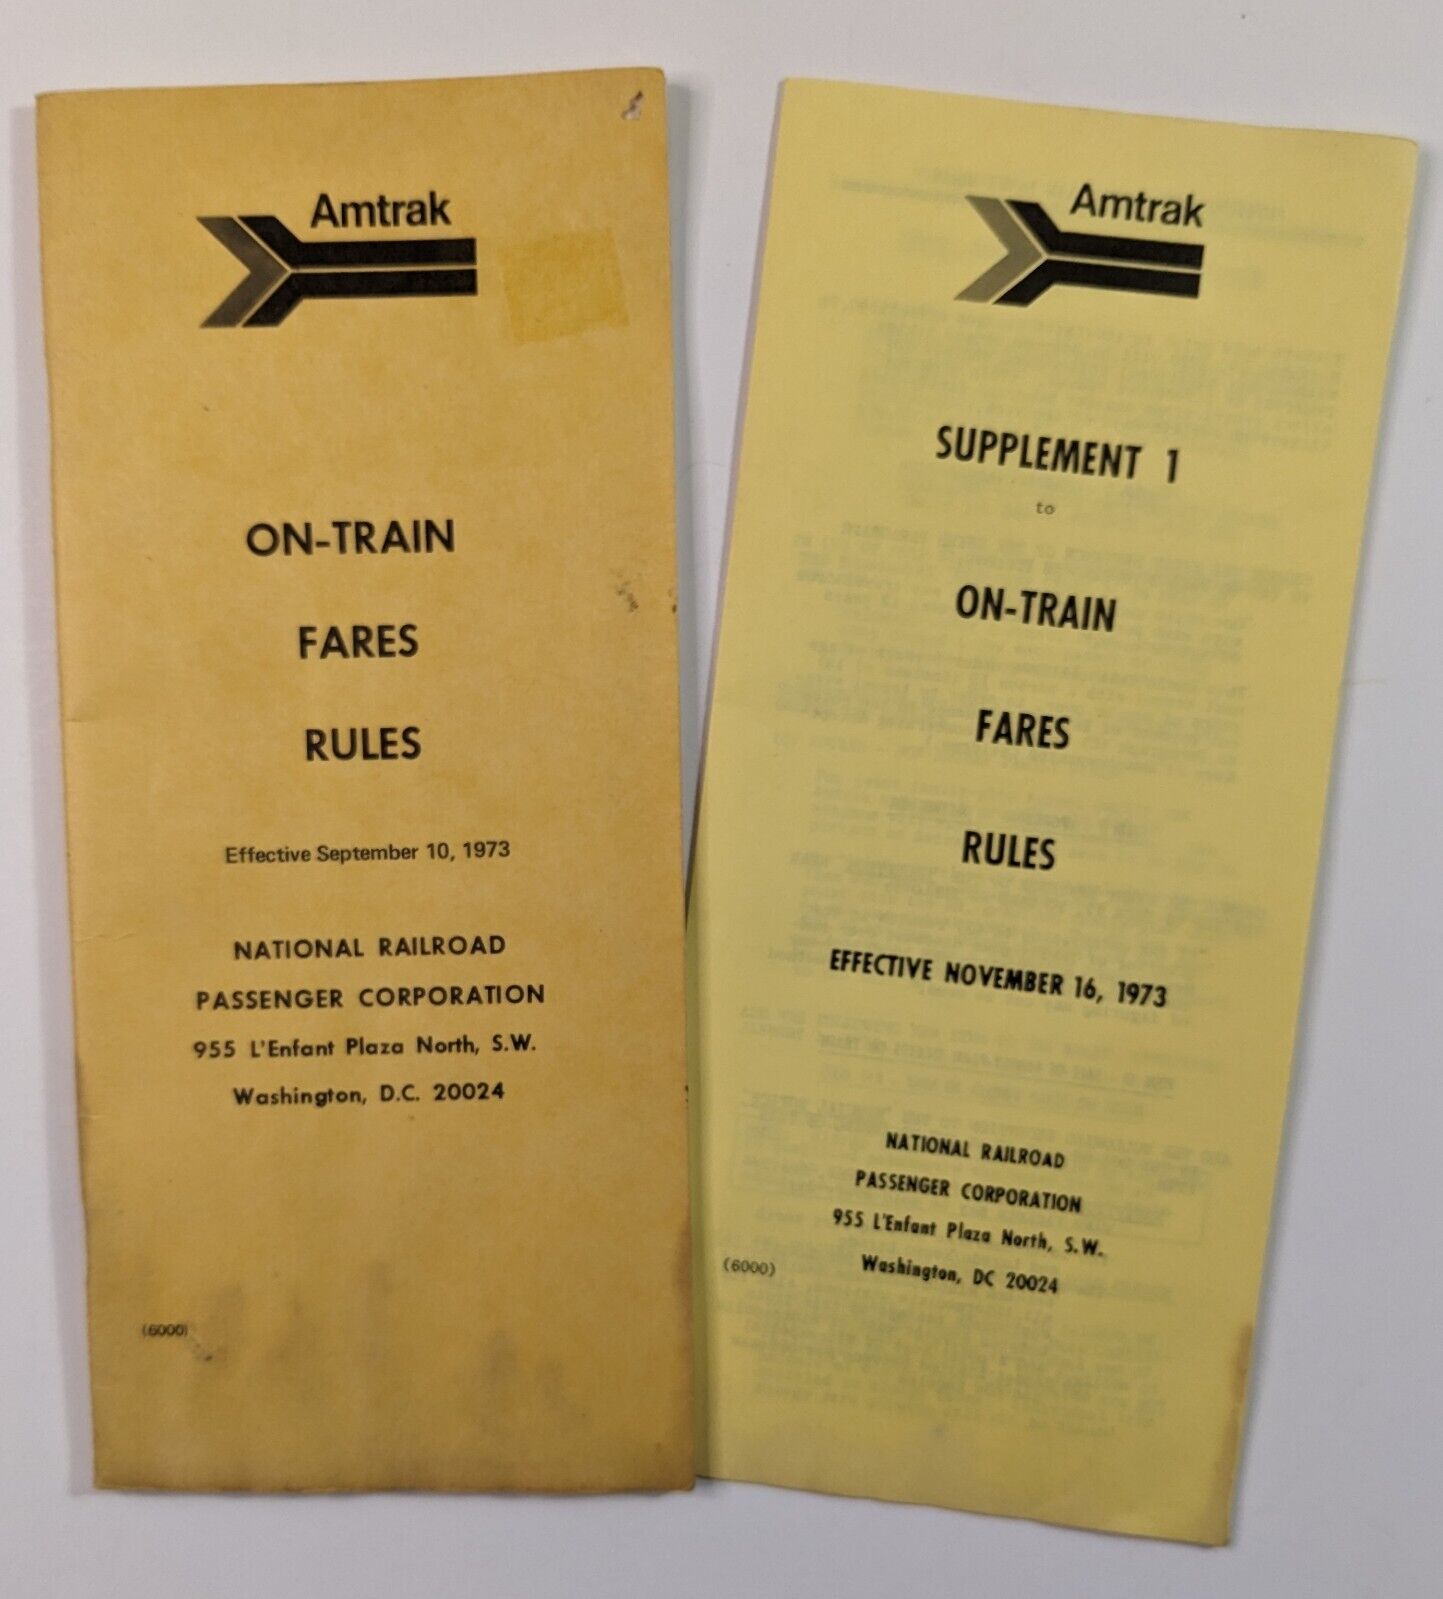 Vtg Amtrak Fare Book & Supplement for Tickets Bought Onboard On-Train 1973